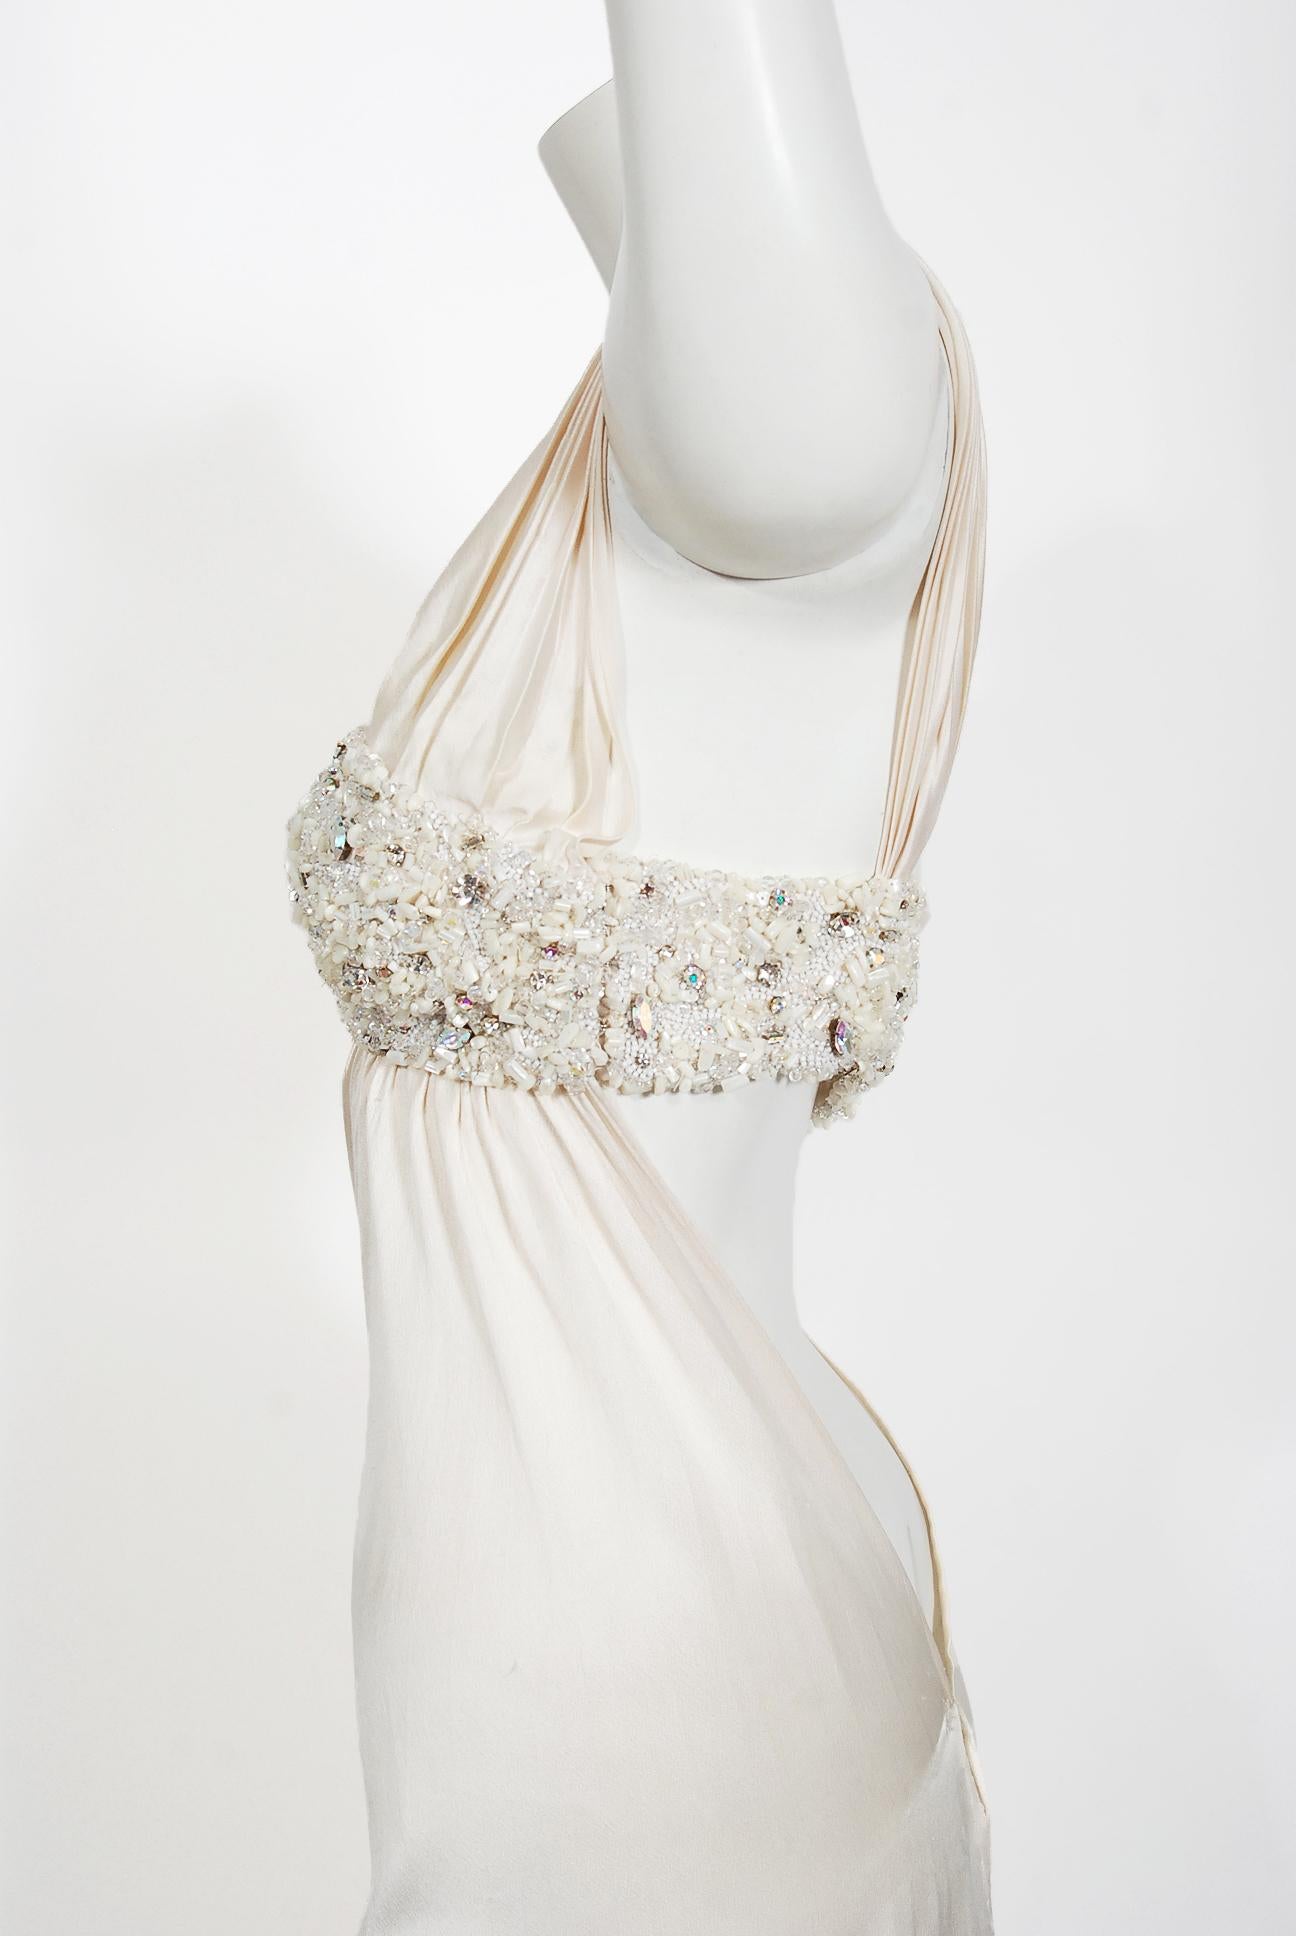 2000 Ungaro Haute Couture Crystal Beaded Asymmetric Cut-Out Ivory Silk Gown 1